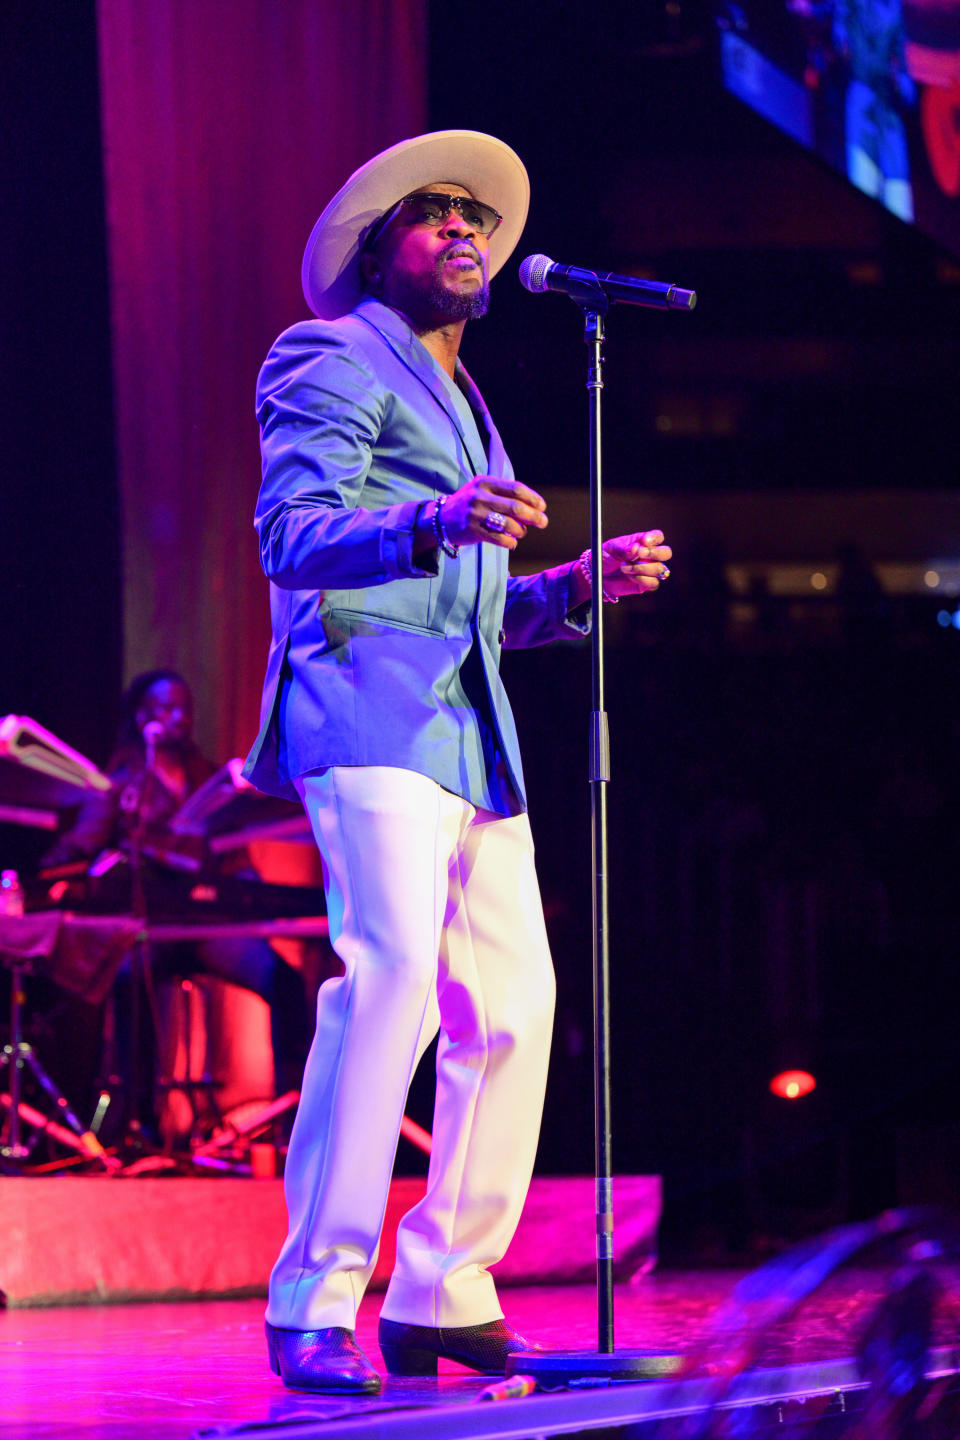 Anthony Williams sings onstage in front of a mic stand